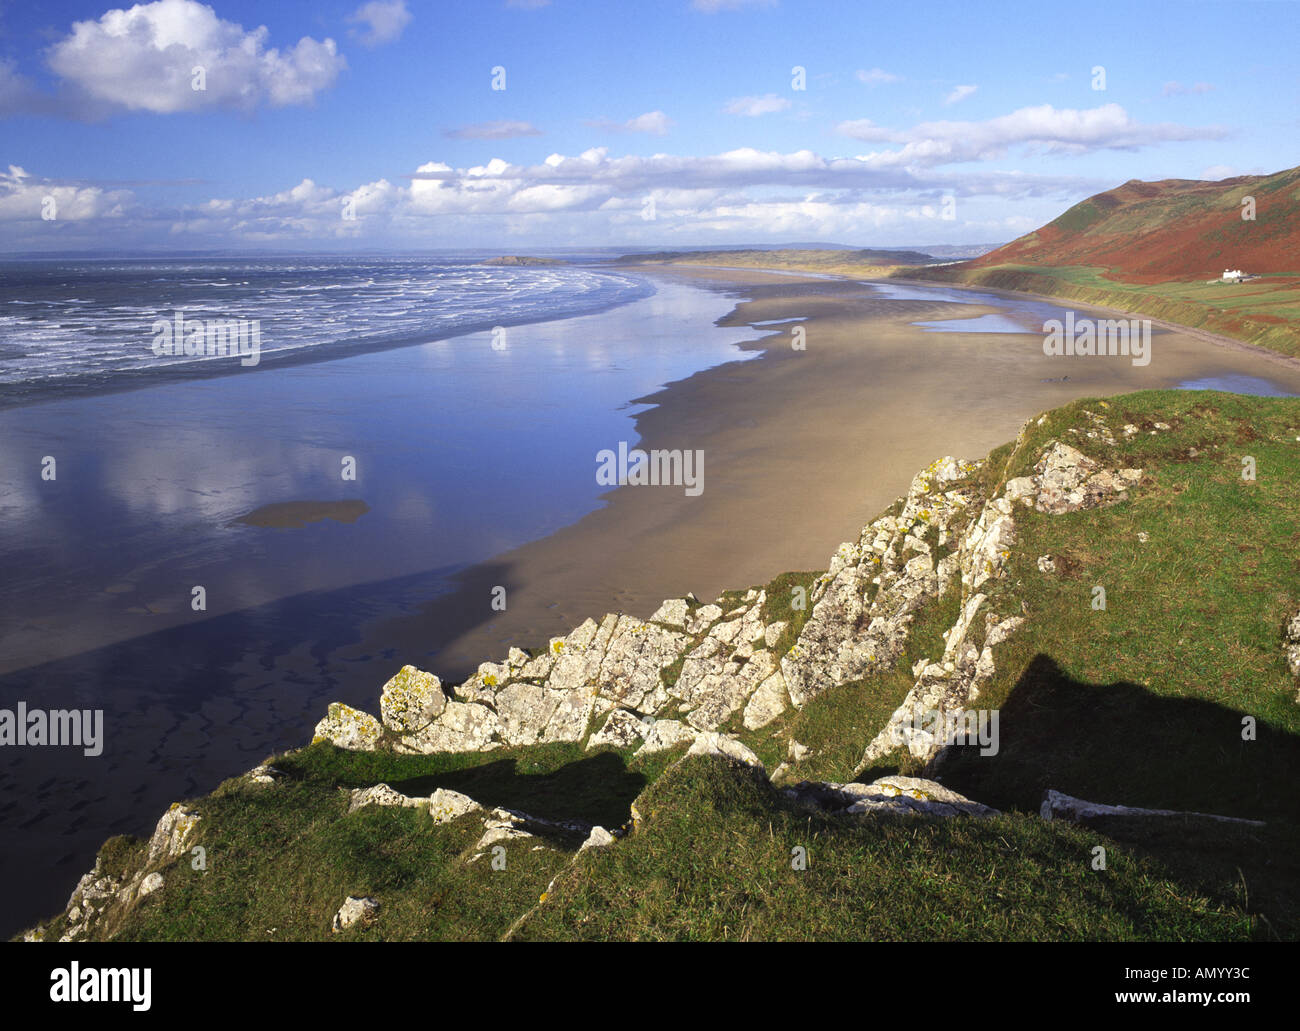 Rhossili Bay on the Gower Peninsula, an Area of Outstanding Natural Beauty in South Wales Stock Photo